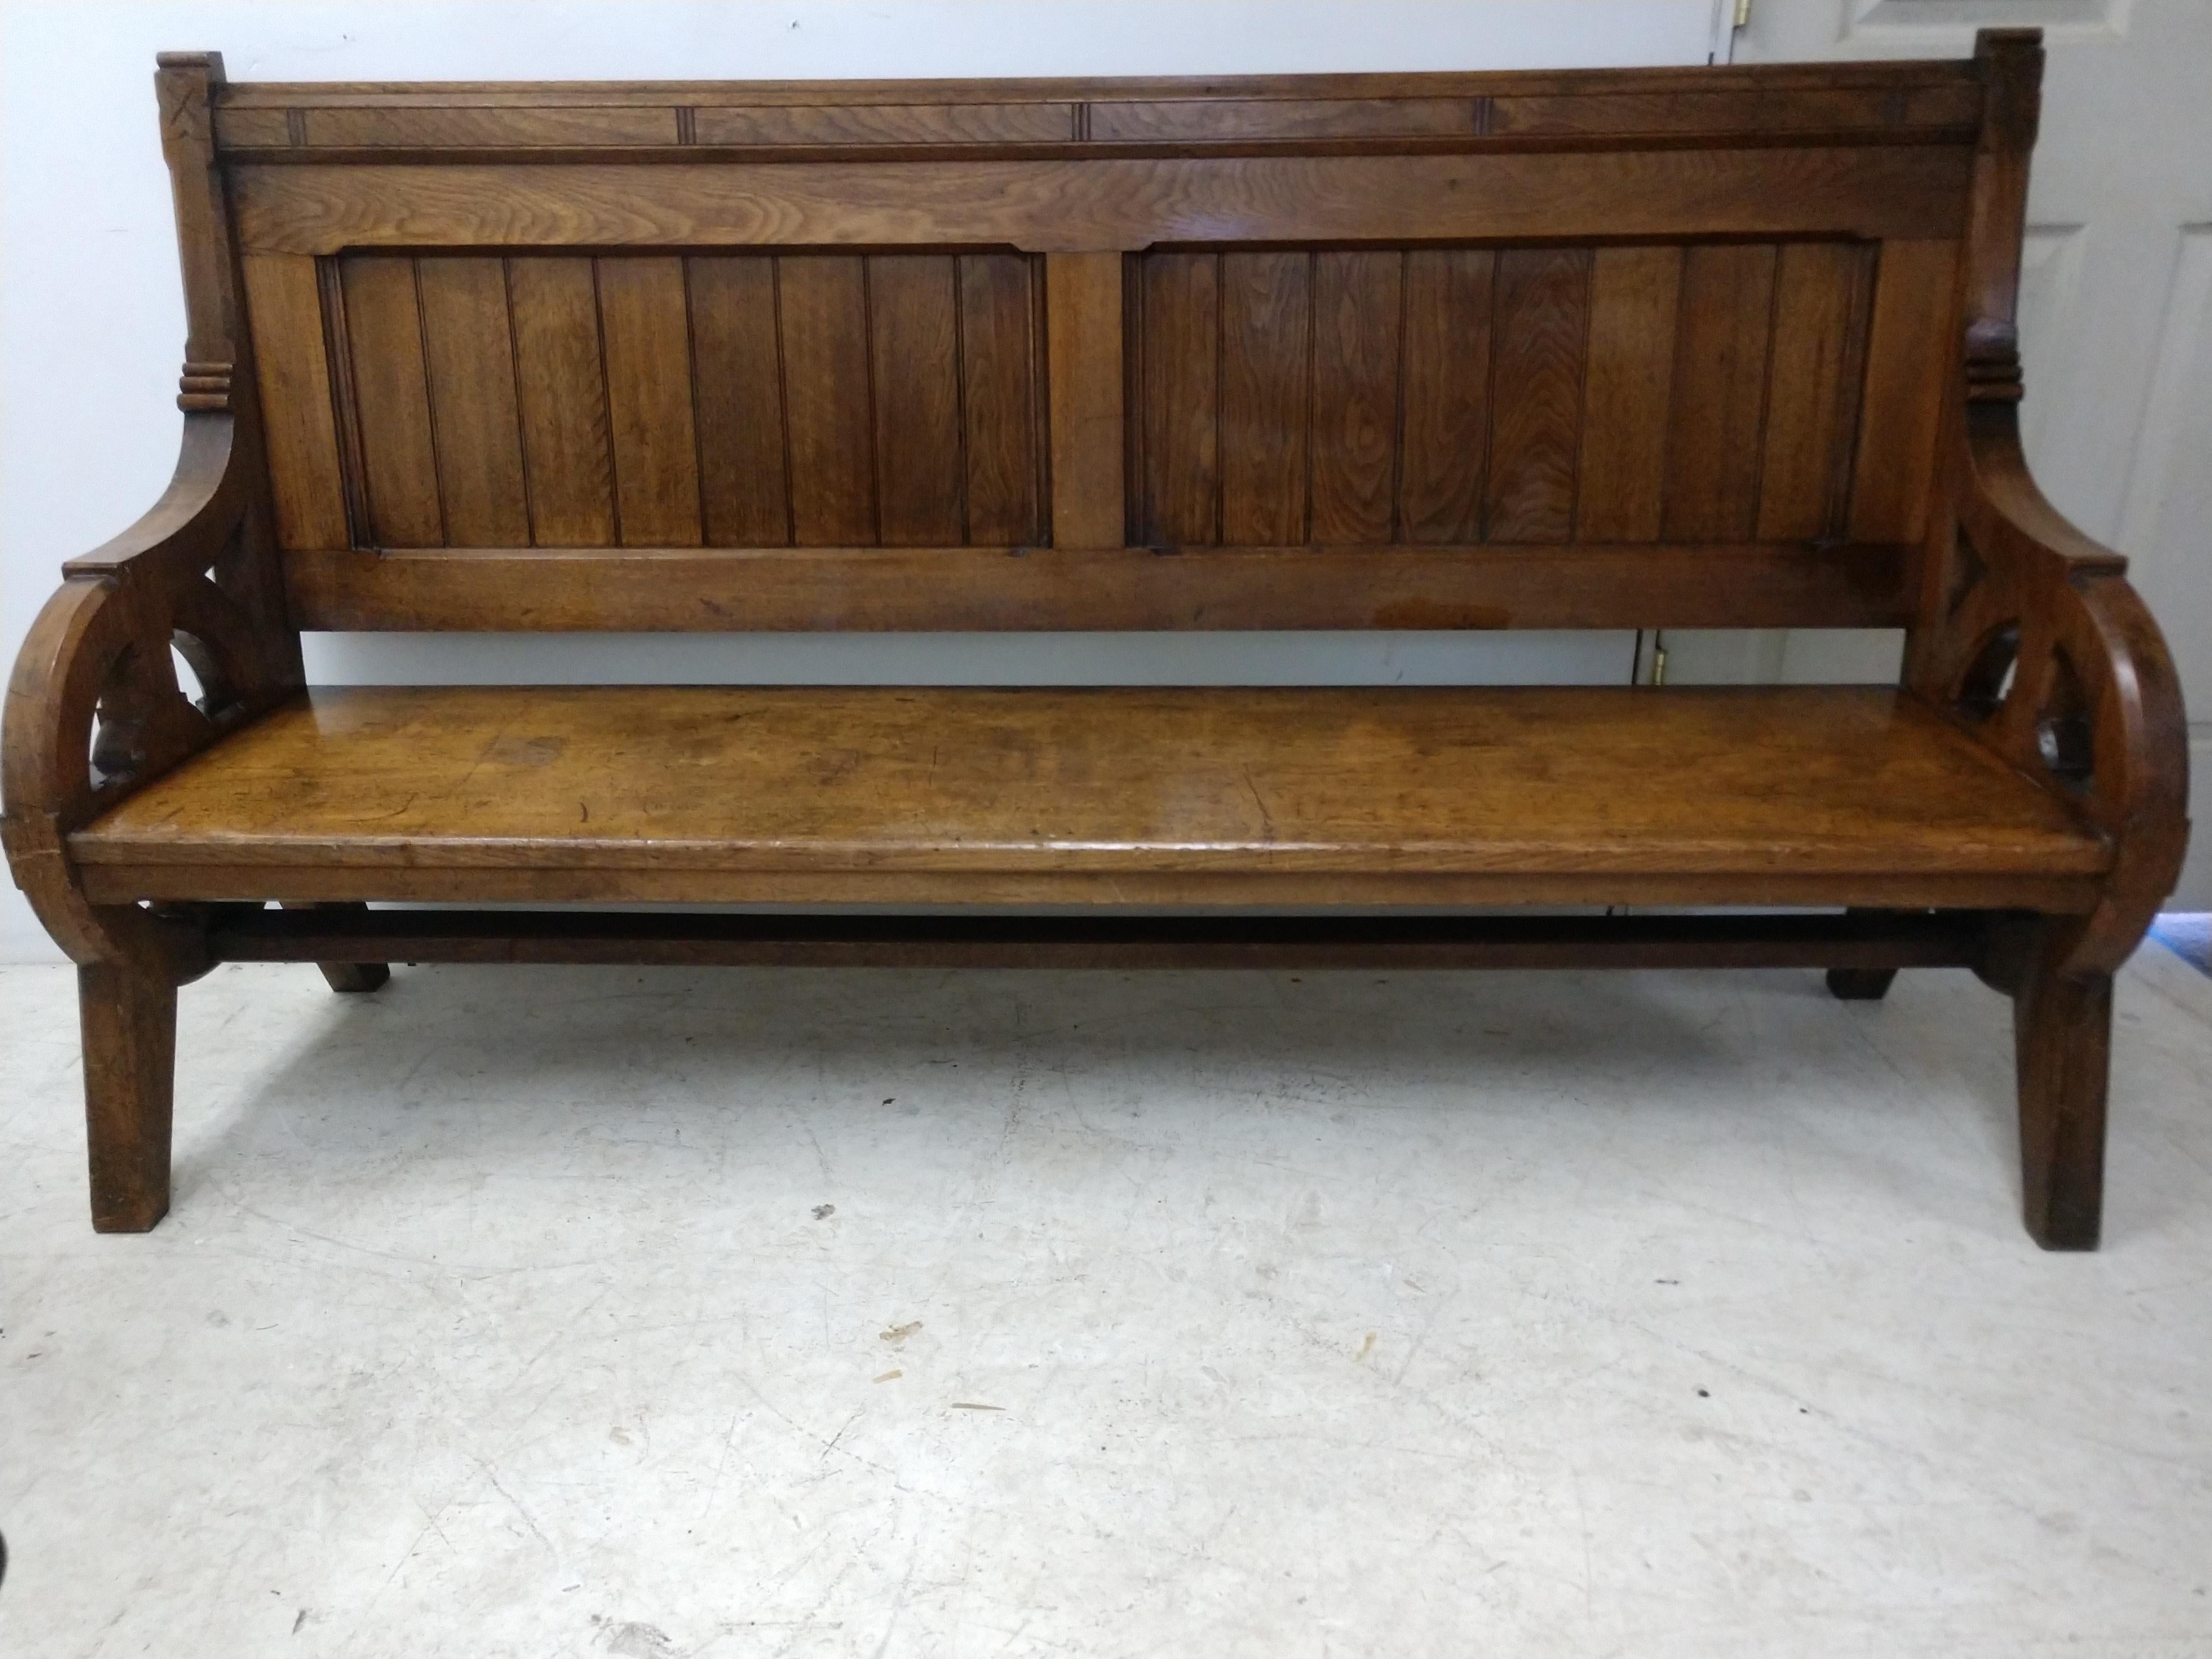 Beautiful design, pierced arm with supports, paneled on both sides and heavy duty 2 inch thick walnut. Seat is one board and 17.5 inches wide. Seat hgt. is 16 inches. In excellent vintage condition with minimal wear. Piece was totally reglued.